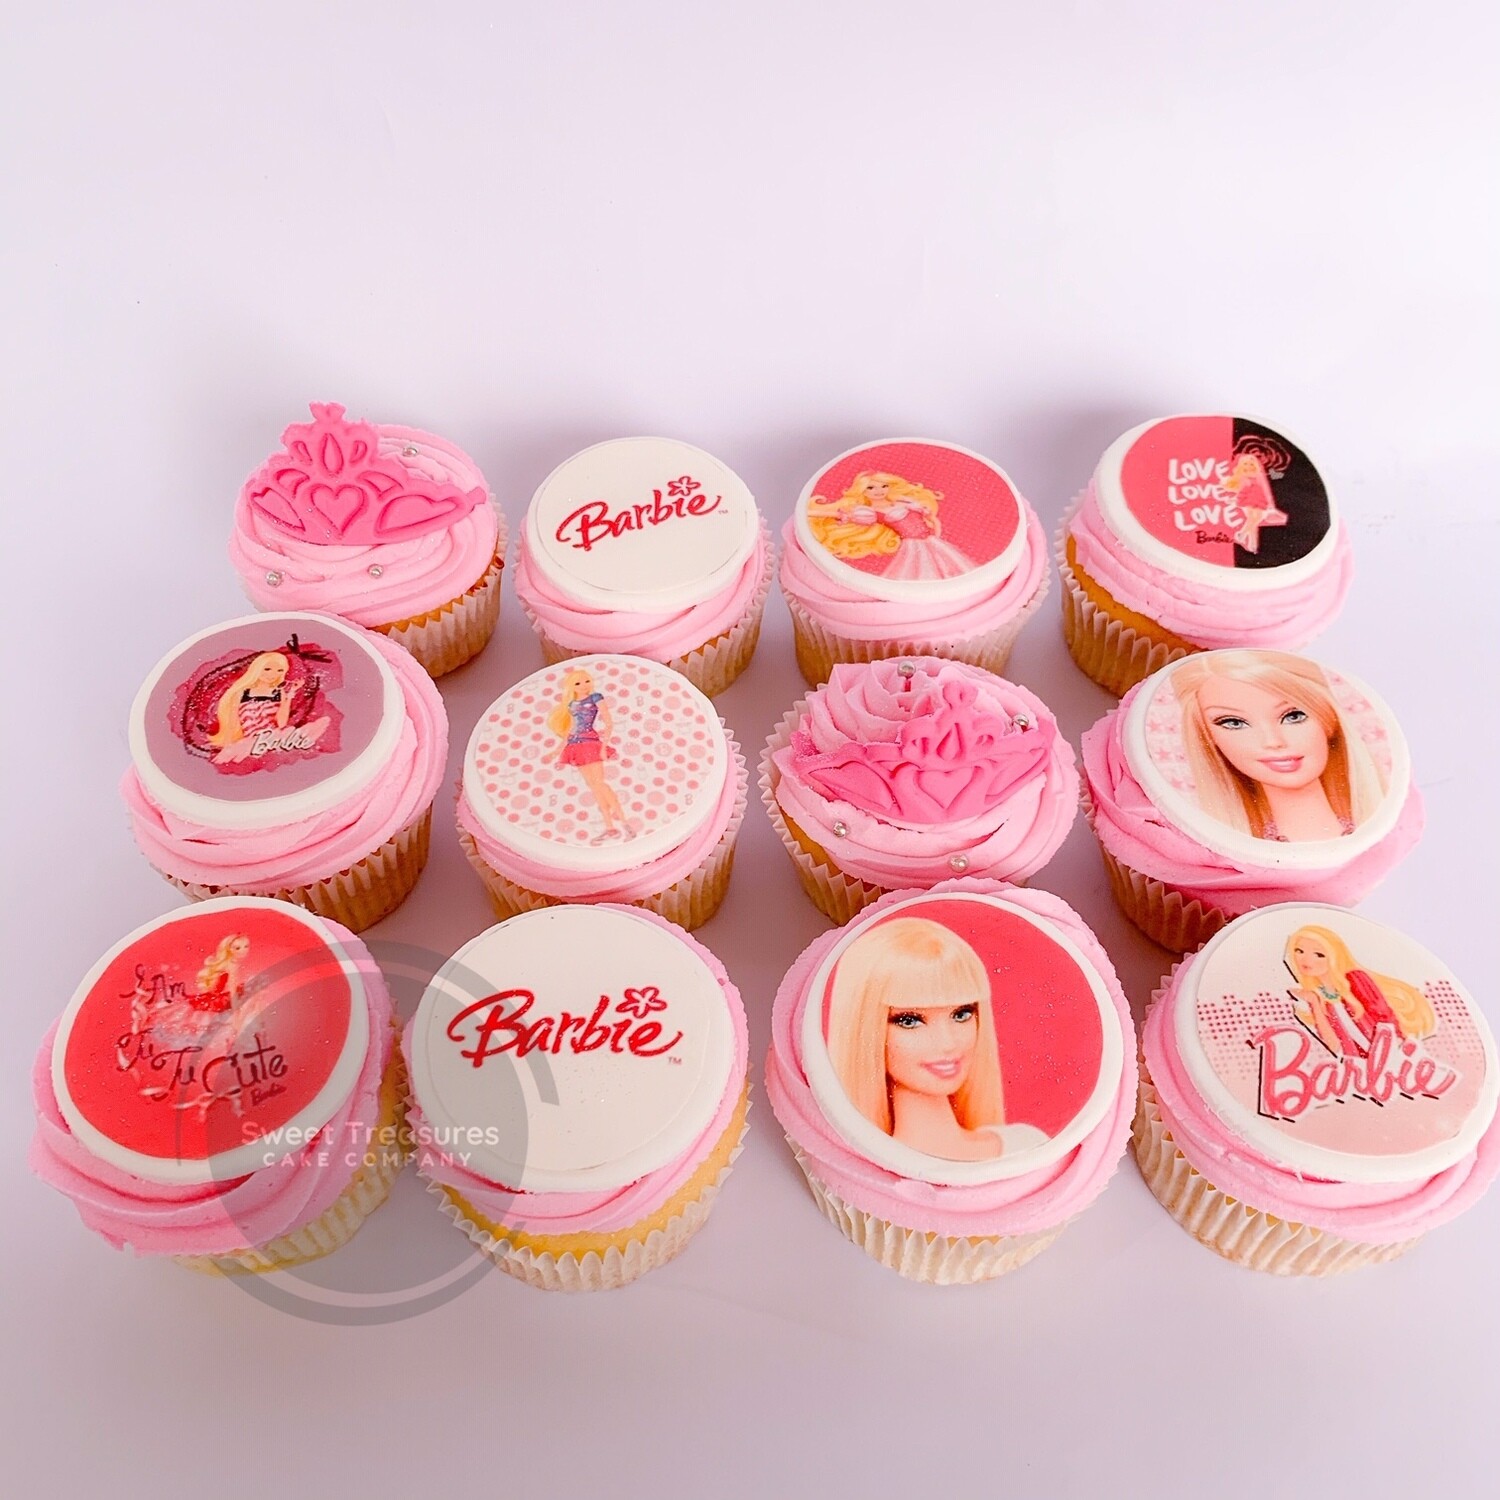 Barbie themed cupcakes